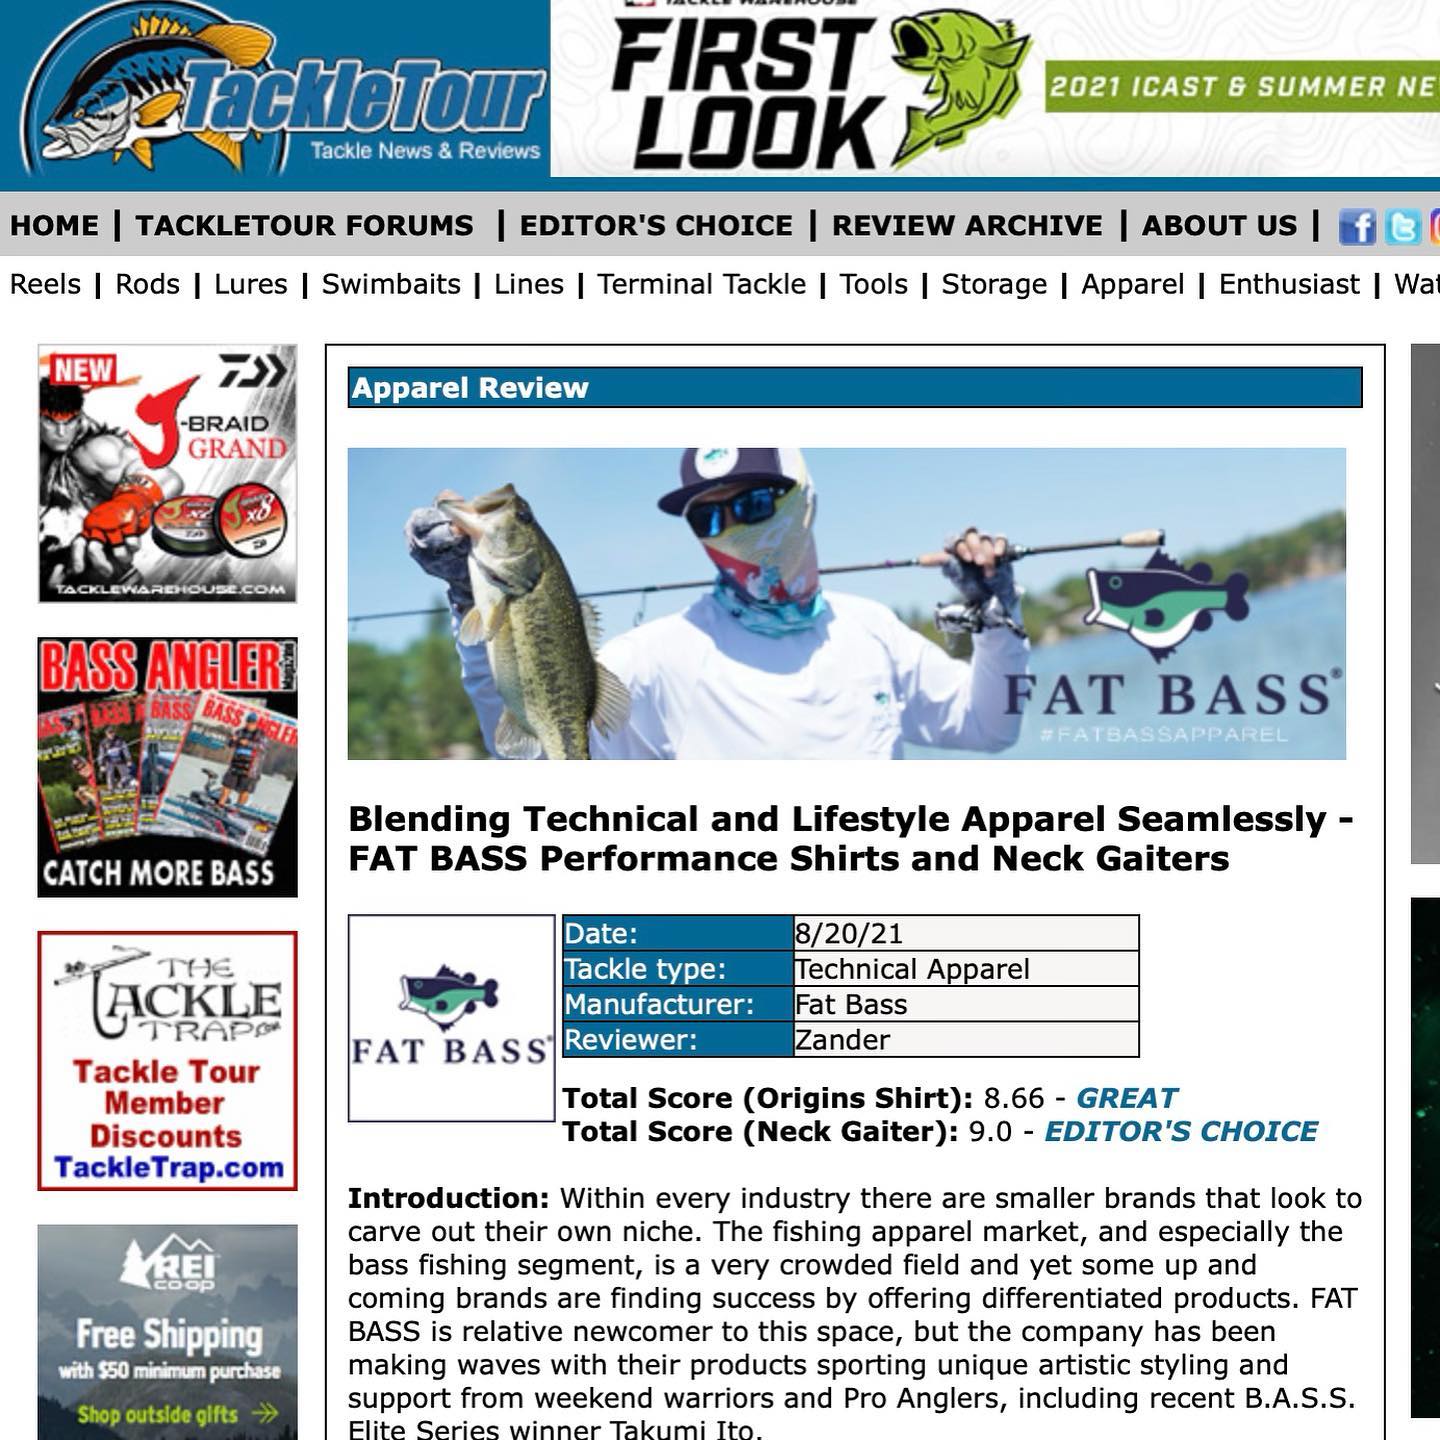 Special Thank You for Tackle Tour for giving FAT BASS an absolutely stellar review!